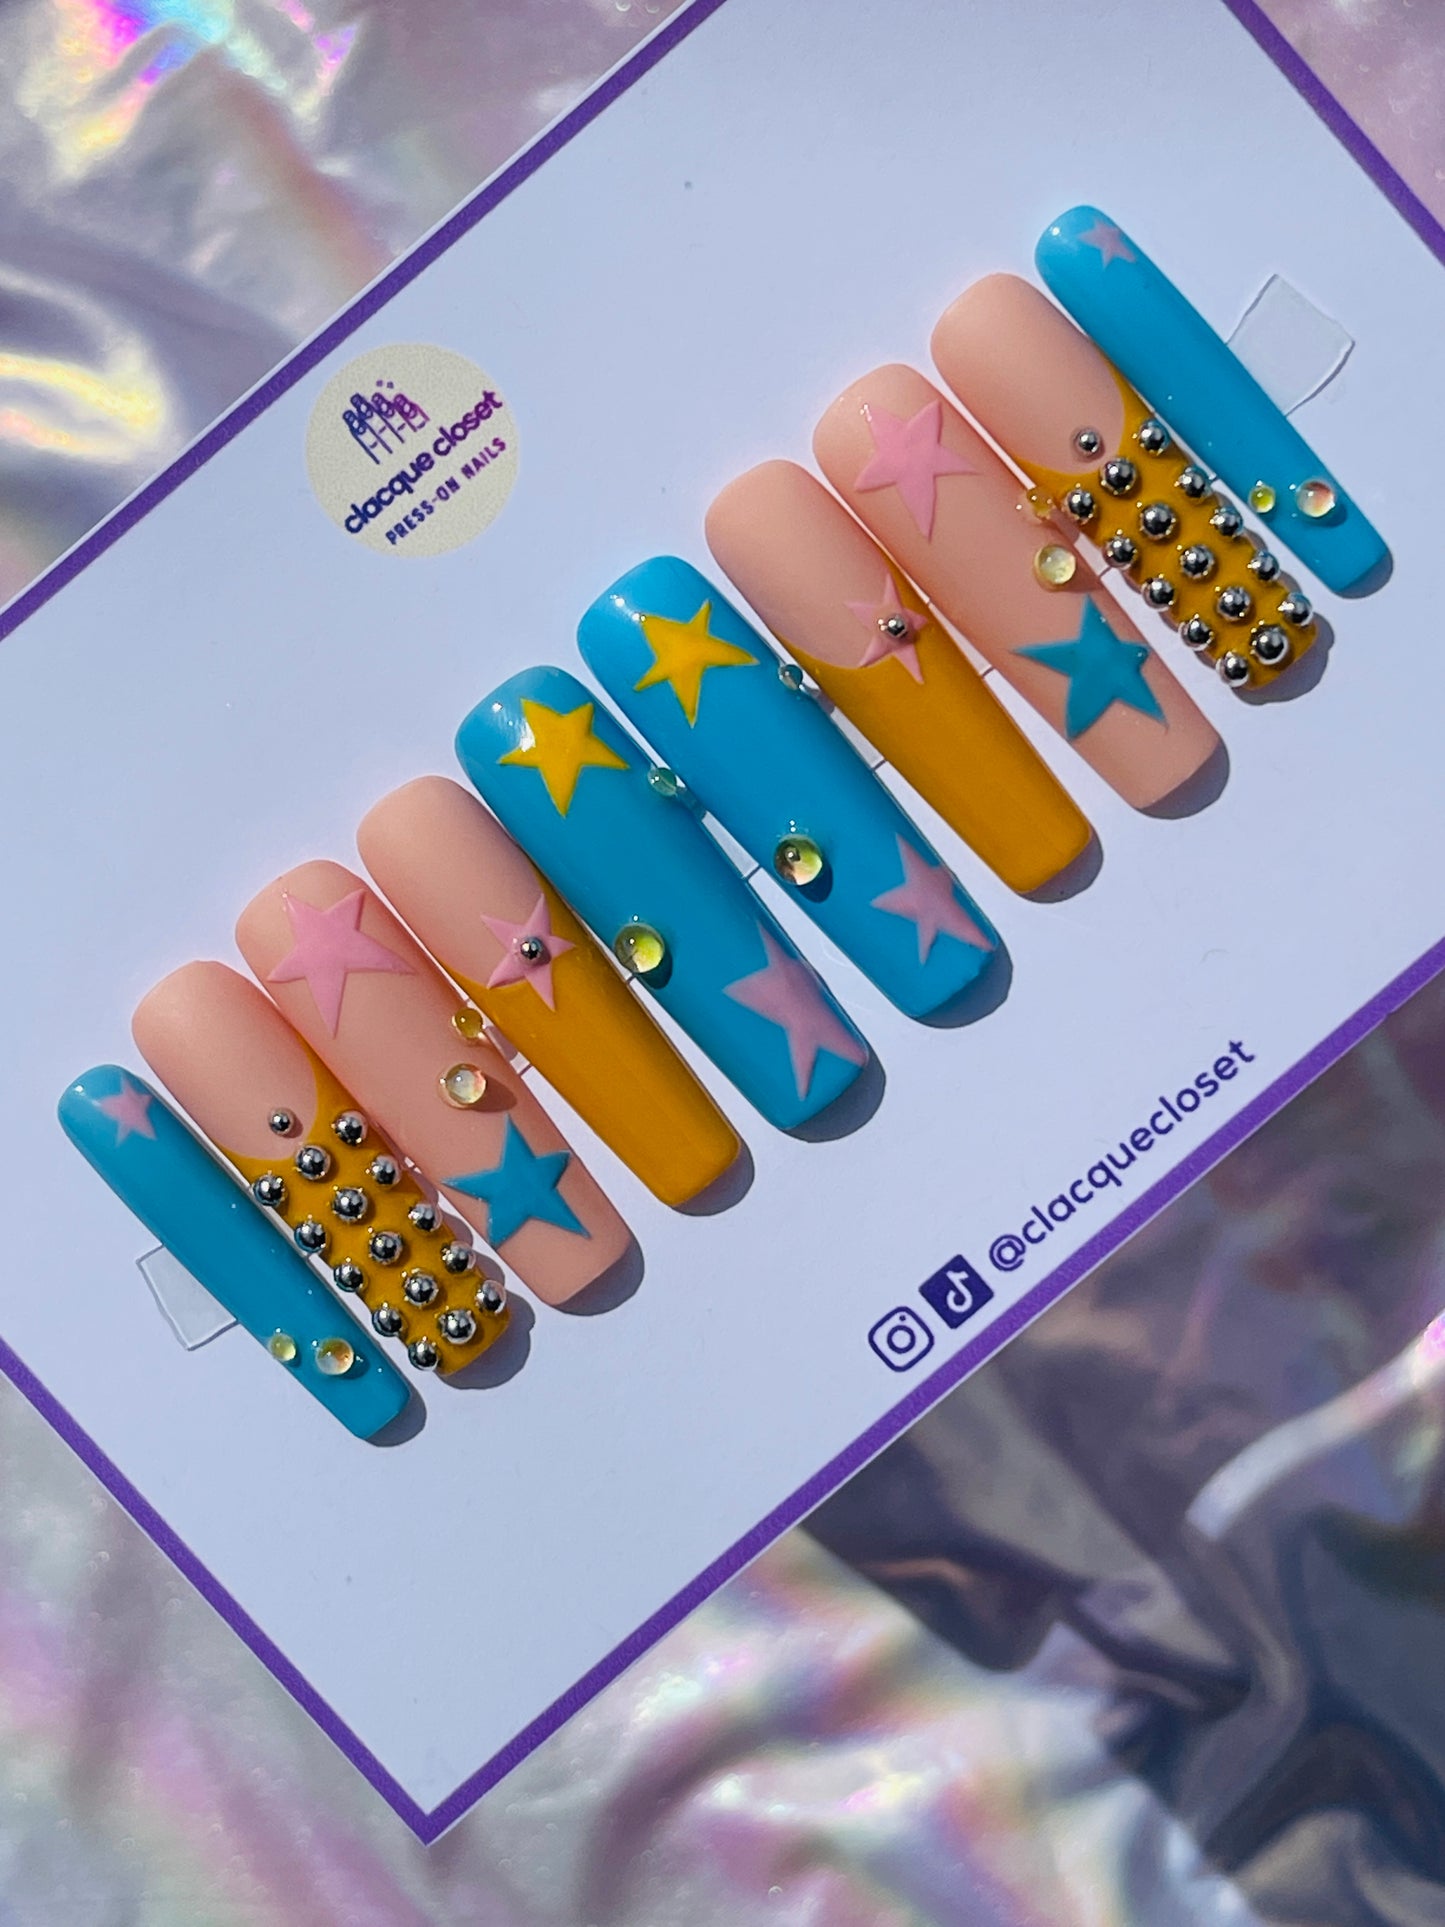 Long square nails painted with a celestial theme, showcasing blue, pink, and yellow stars scattered across a clear base, accented with tiny silver balls for added dimension.